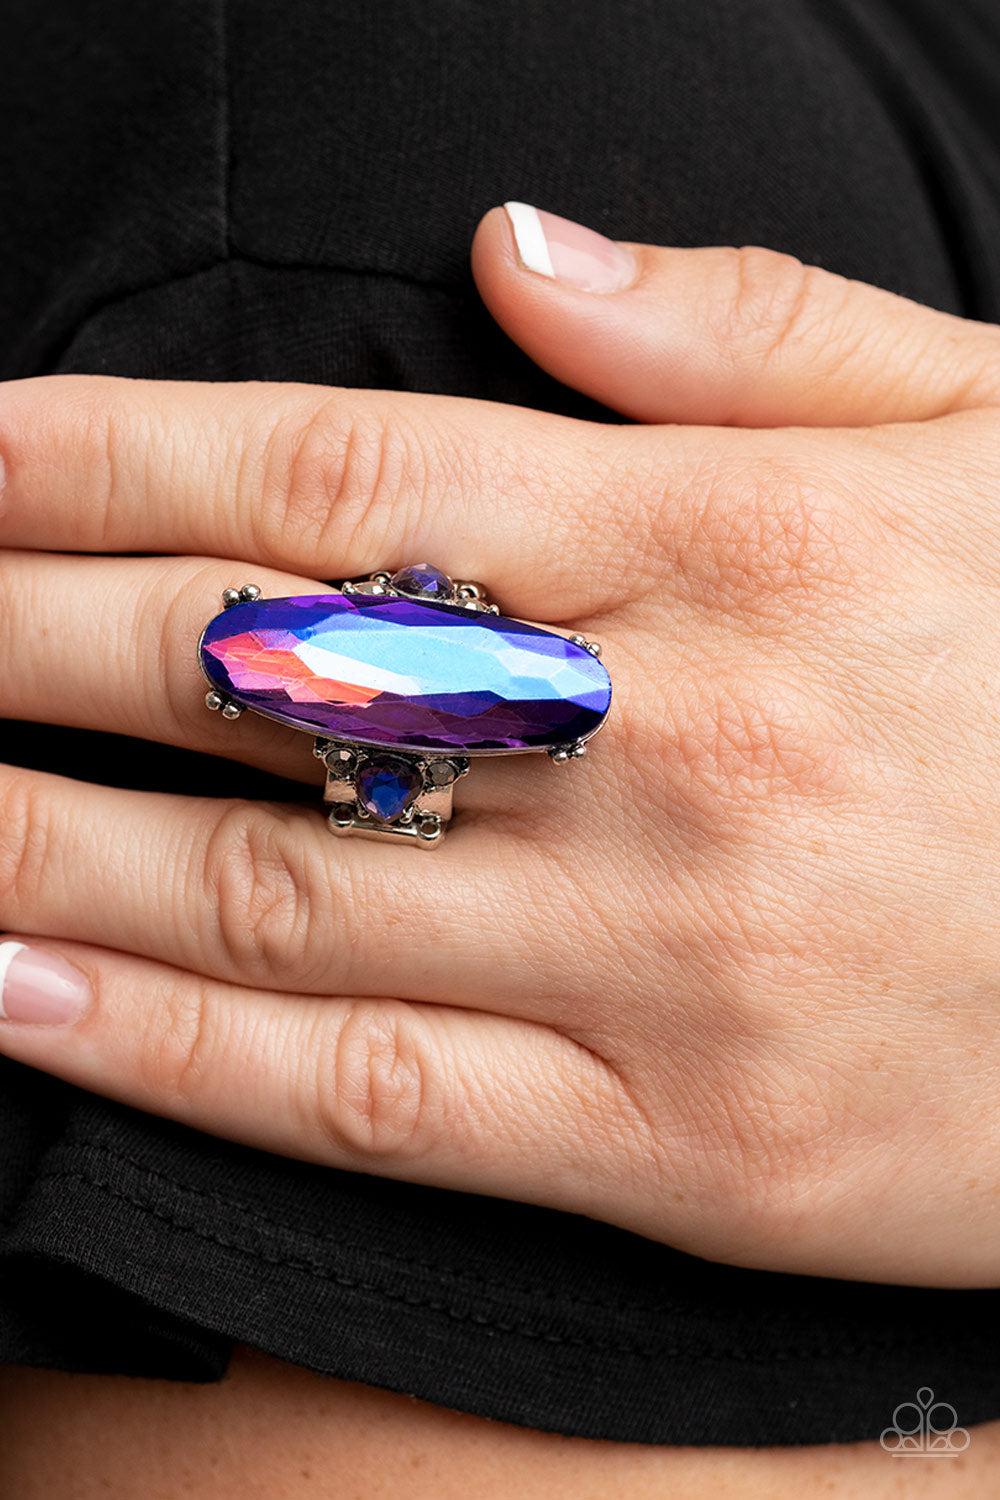 Featuring a stellar purple UV finish, an oversized blue oval gem sparkles between two dainty UV rhinestones atop a hematite dotted silver band for an out-of-this-world shimmer atop the finger. Features a stretchy band for a flexible fit.